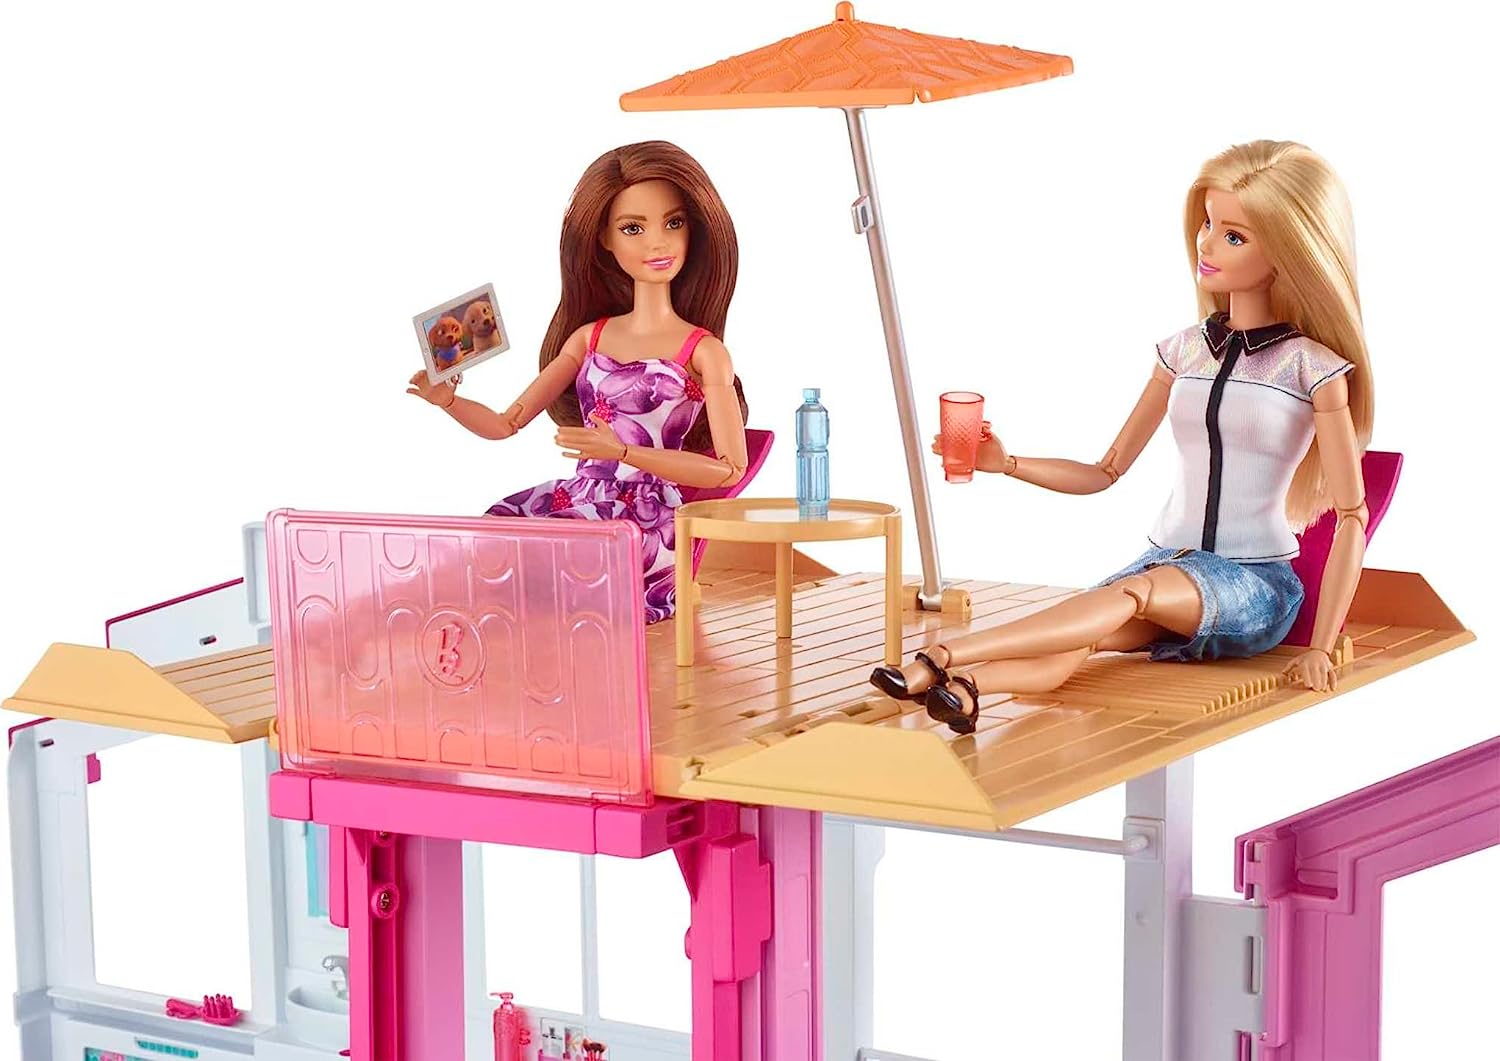 Barbie Dreamhouse with Furniture and Accessories